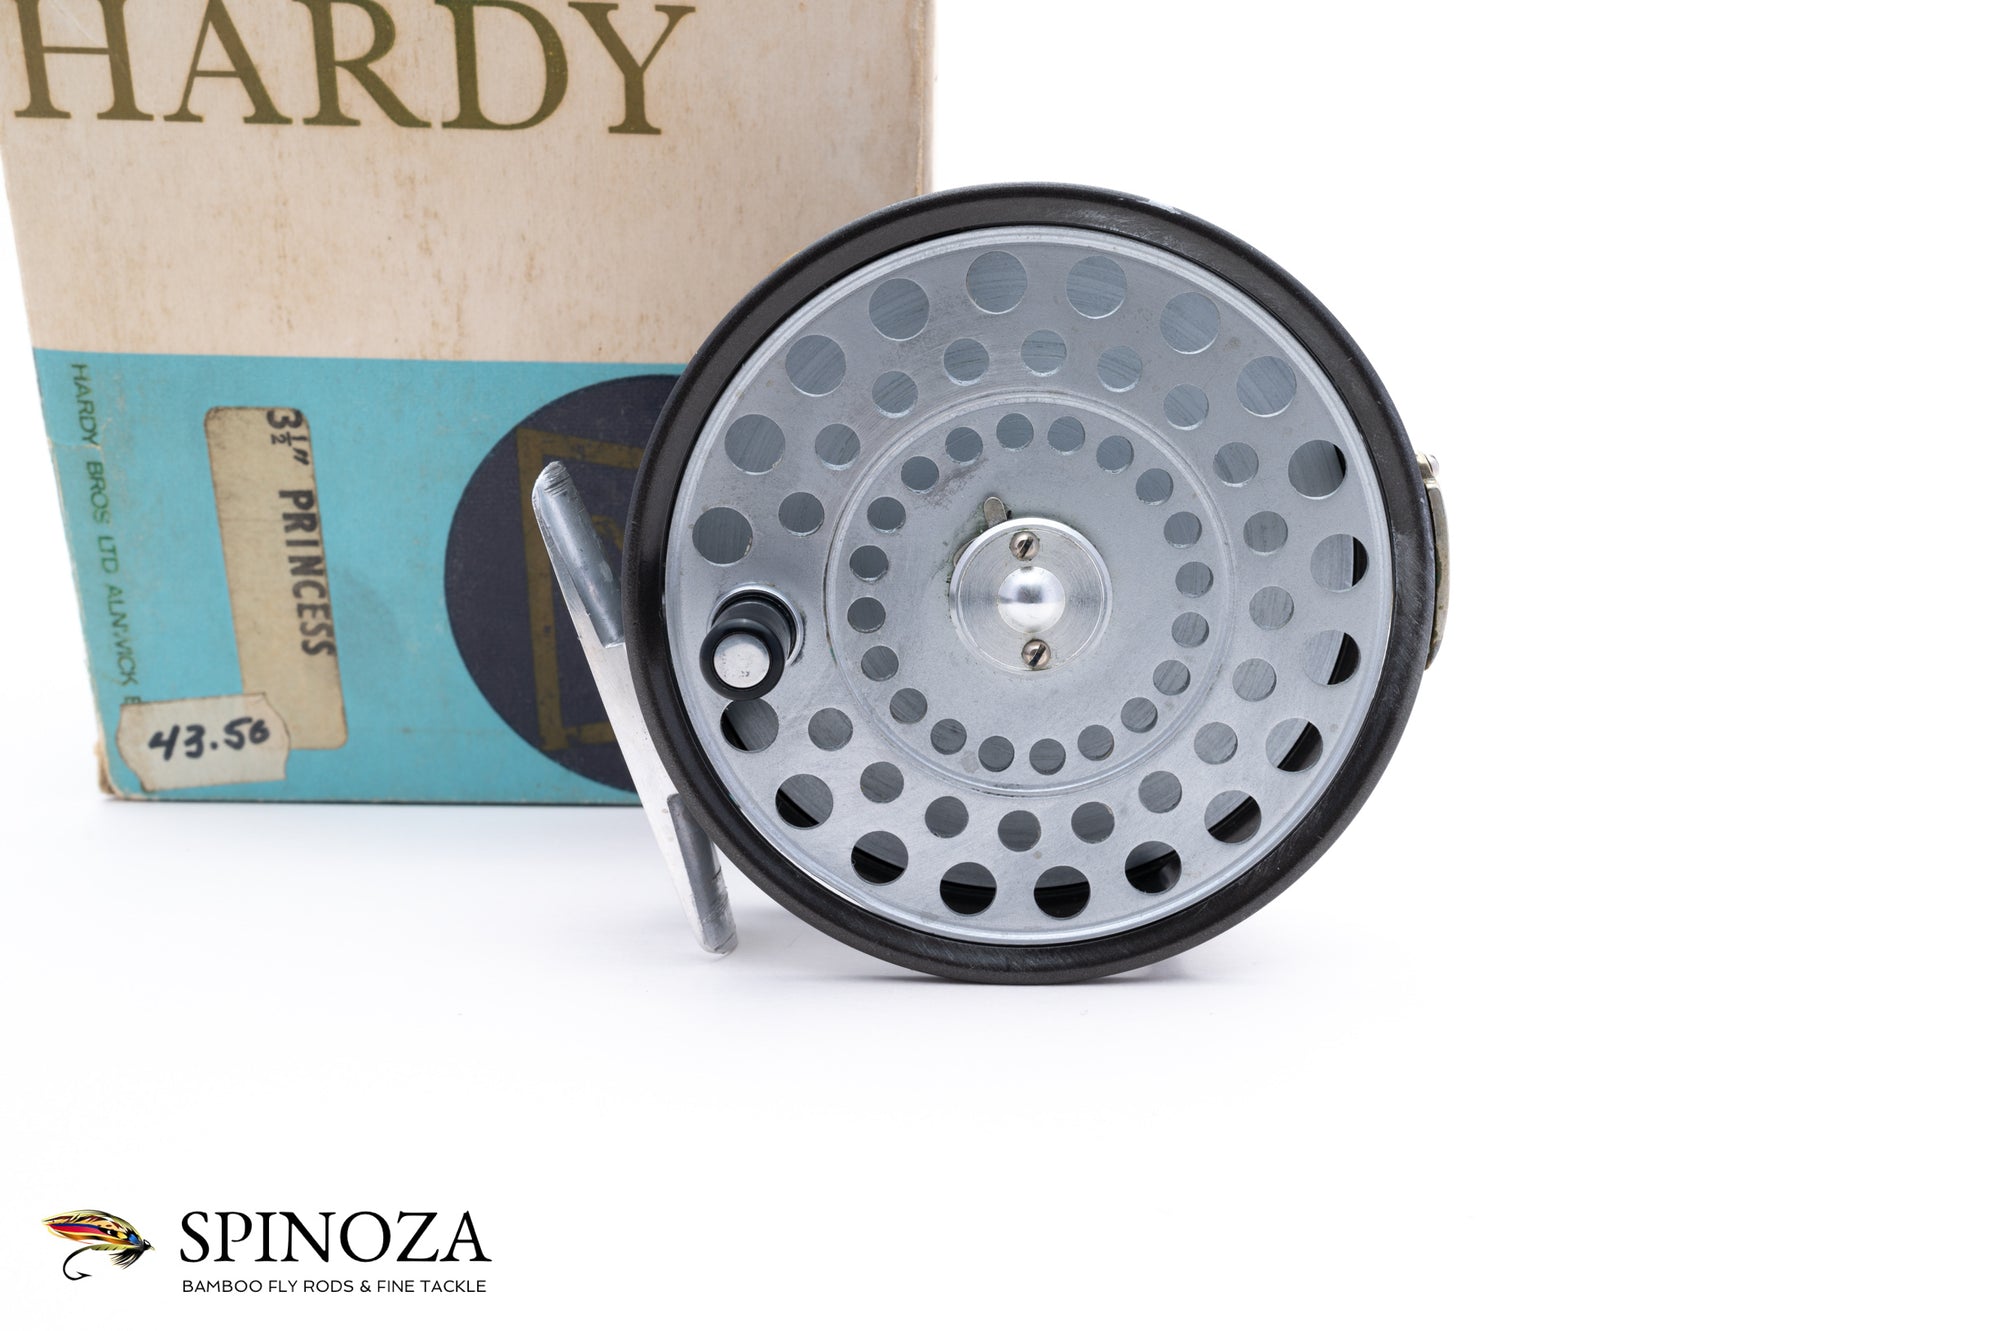 Antique Fly Reels: A History & Value Guide: Homel, D. B.